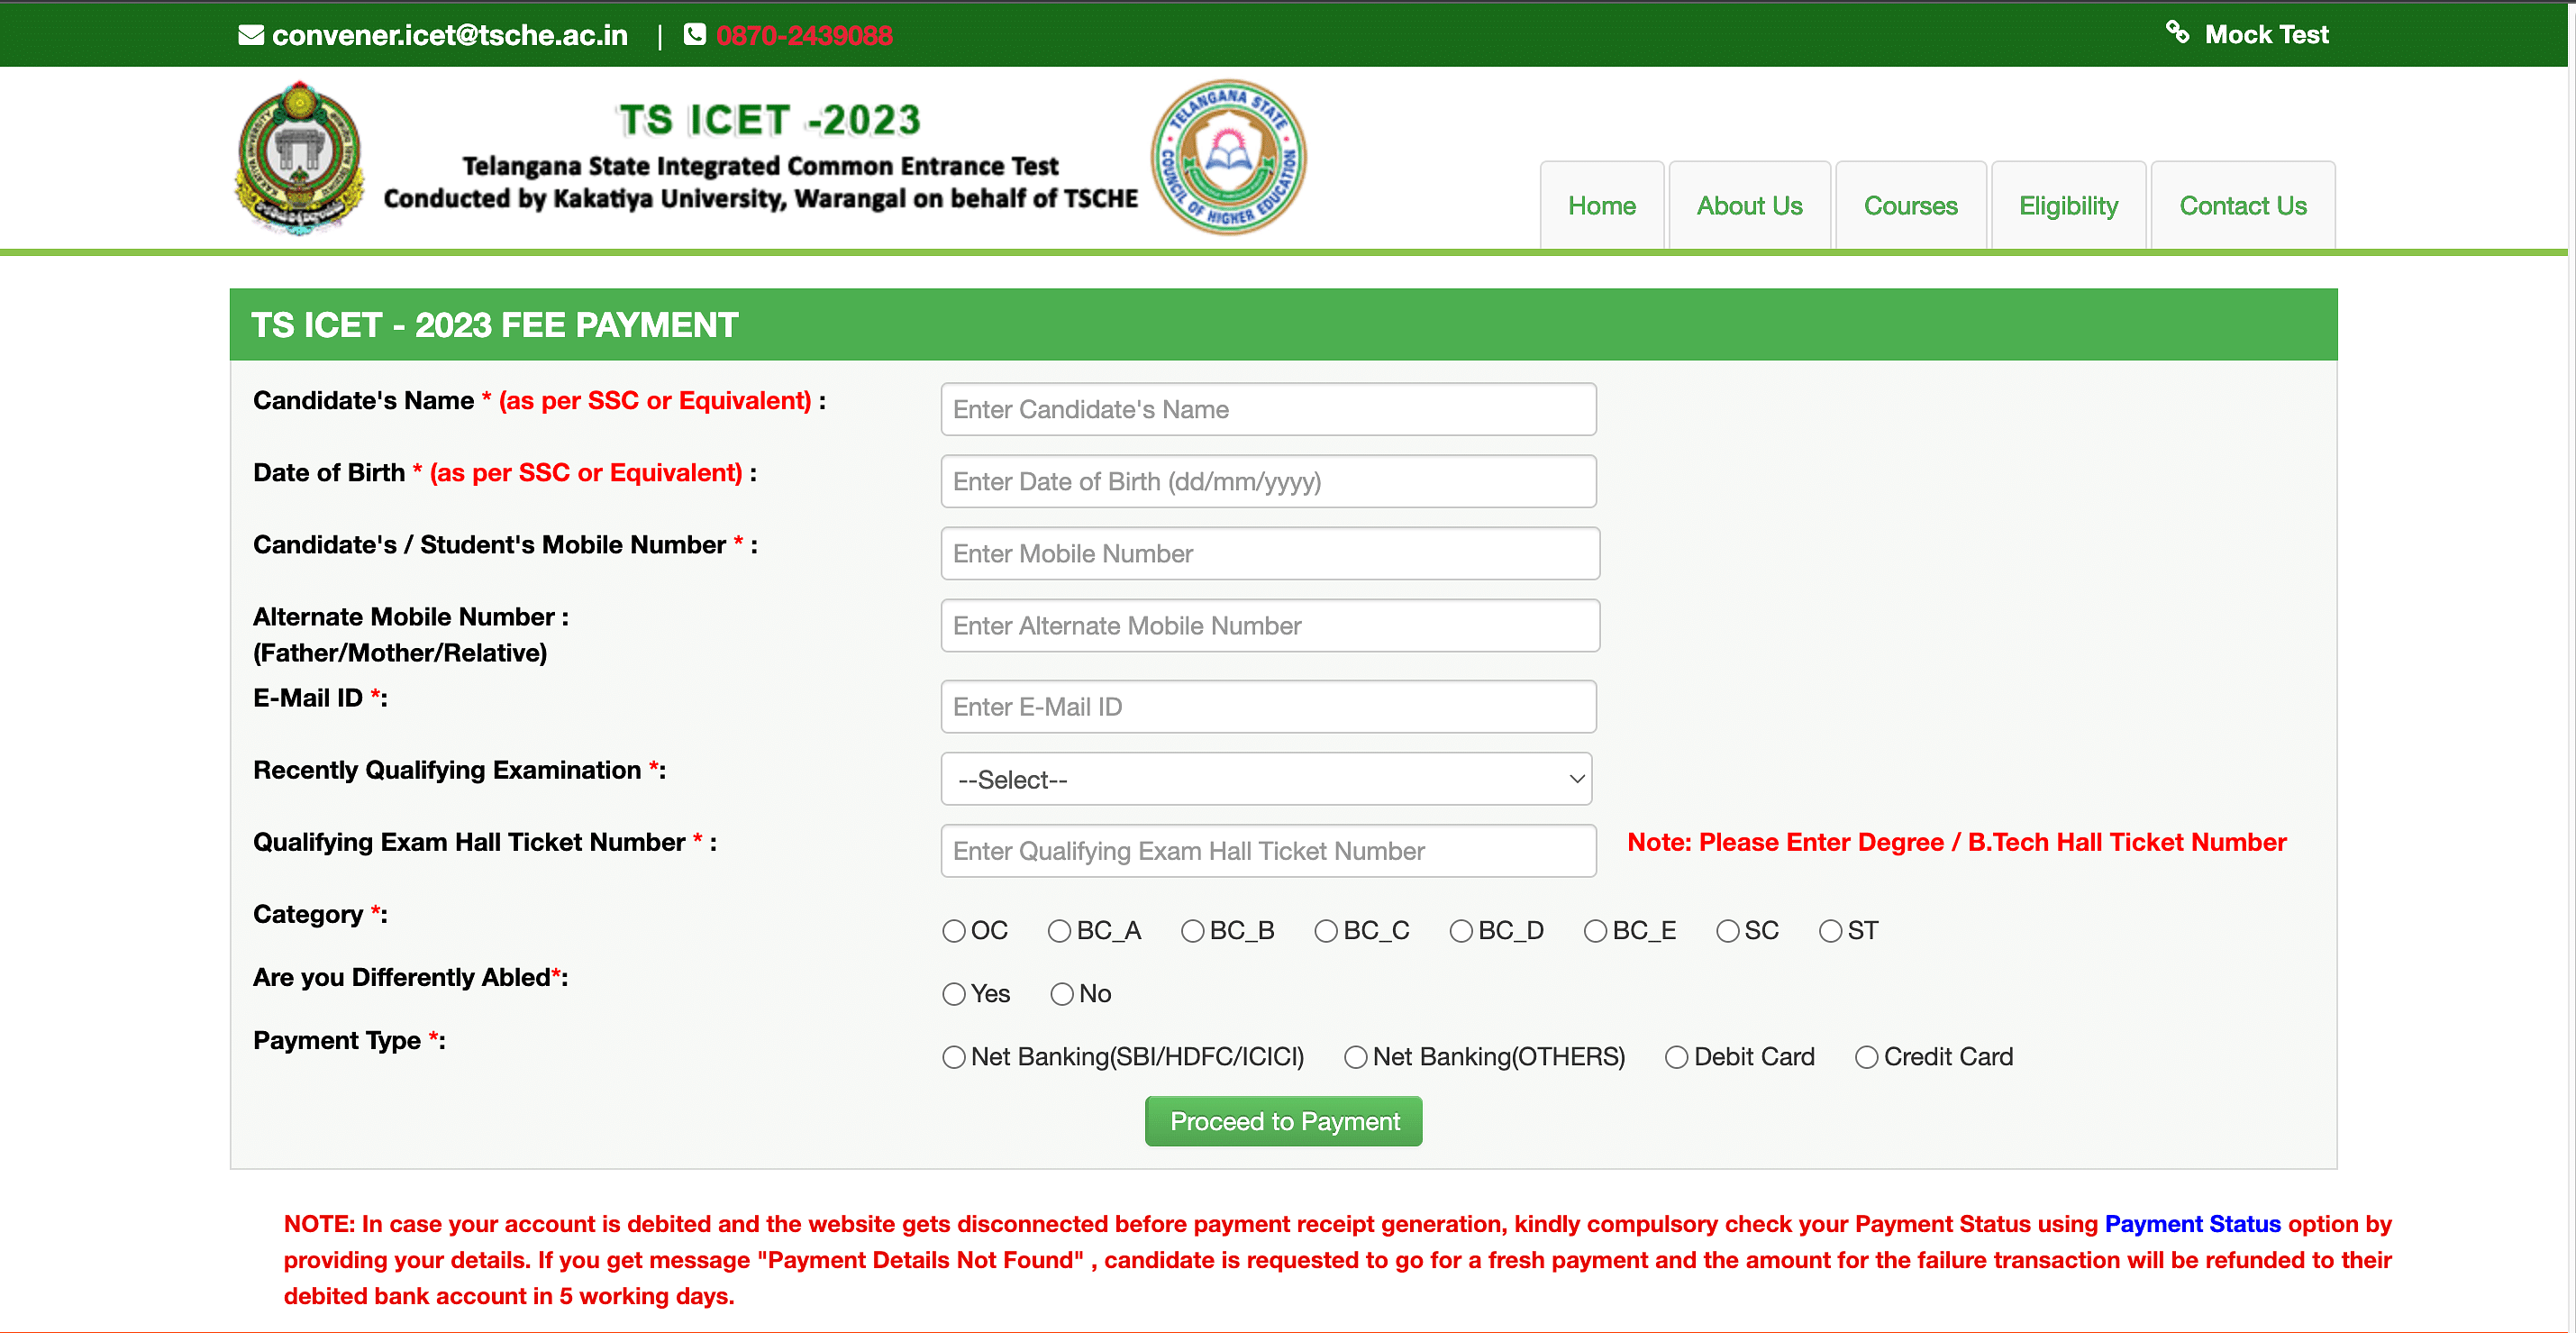 TS ICET Application Fee Payment 2023